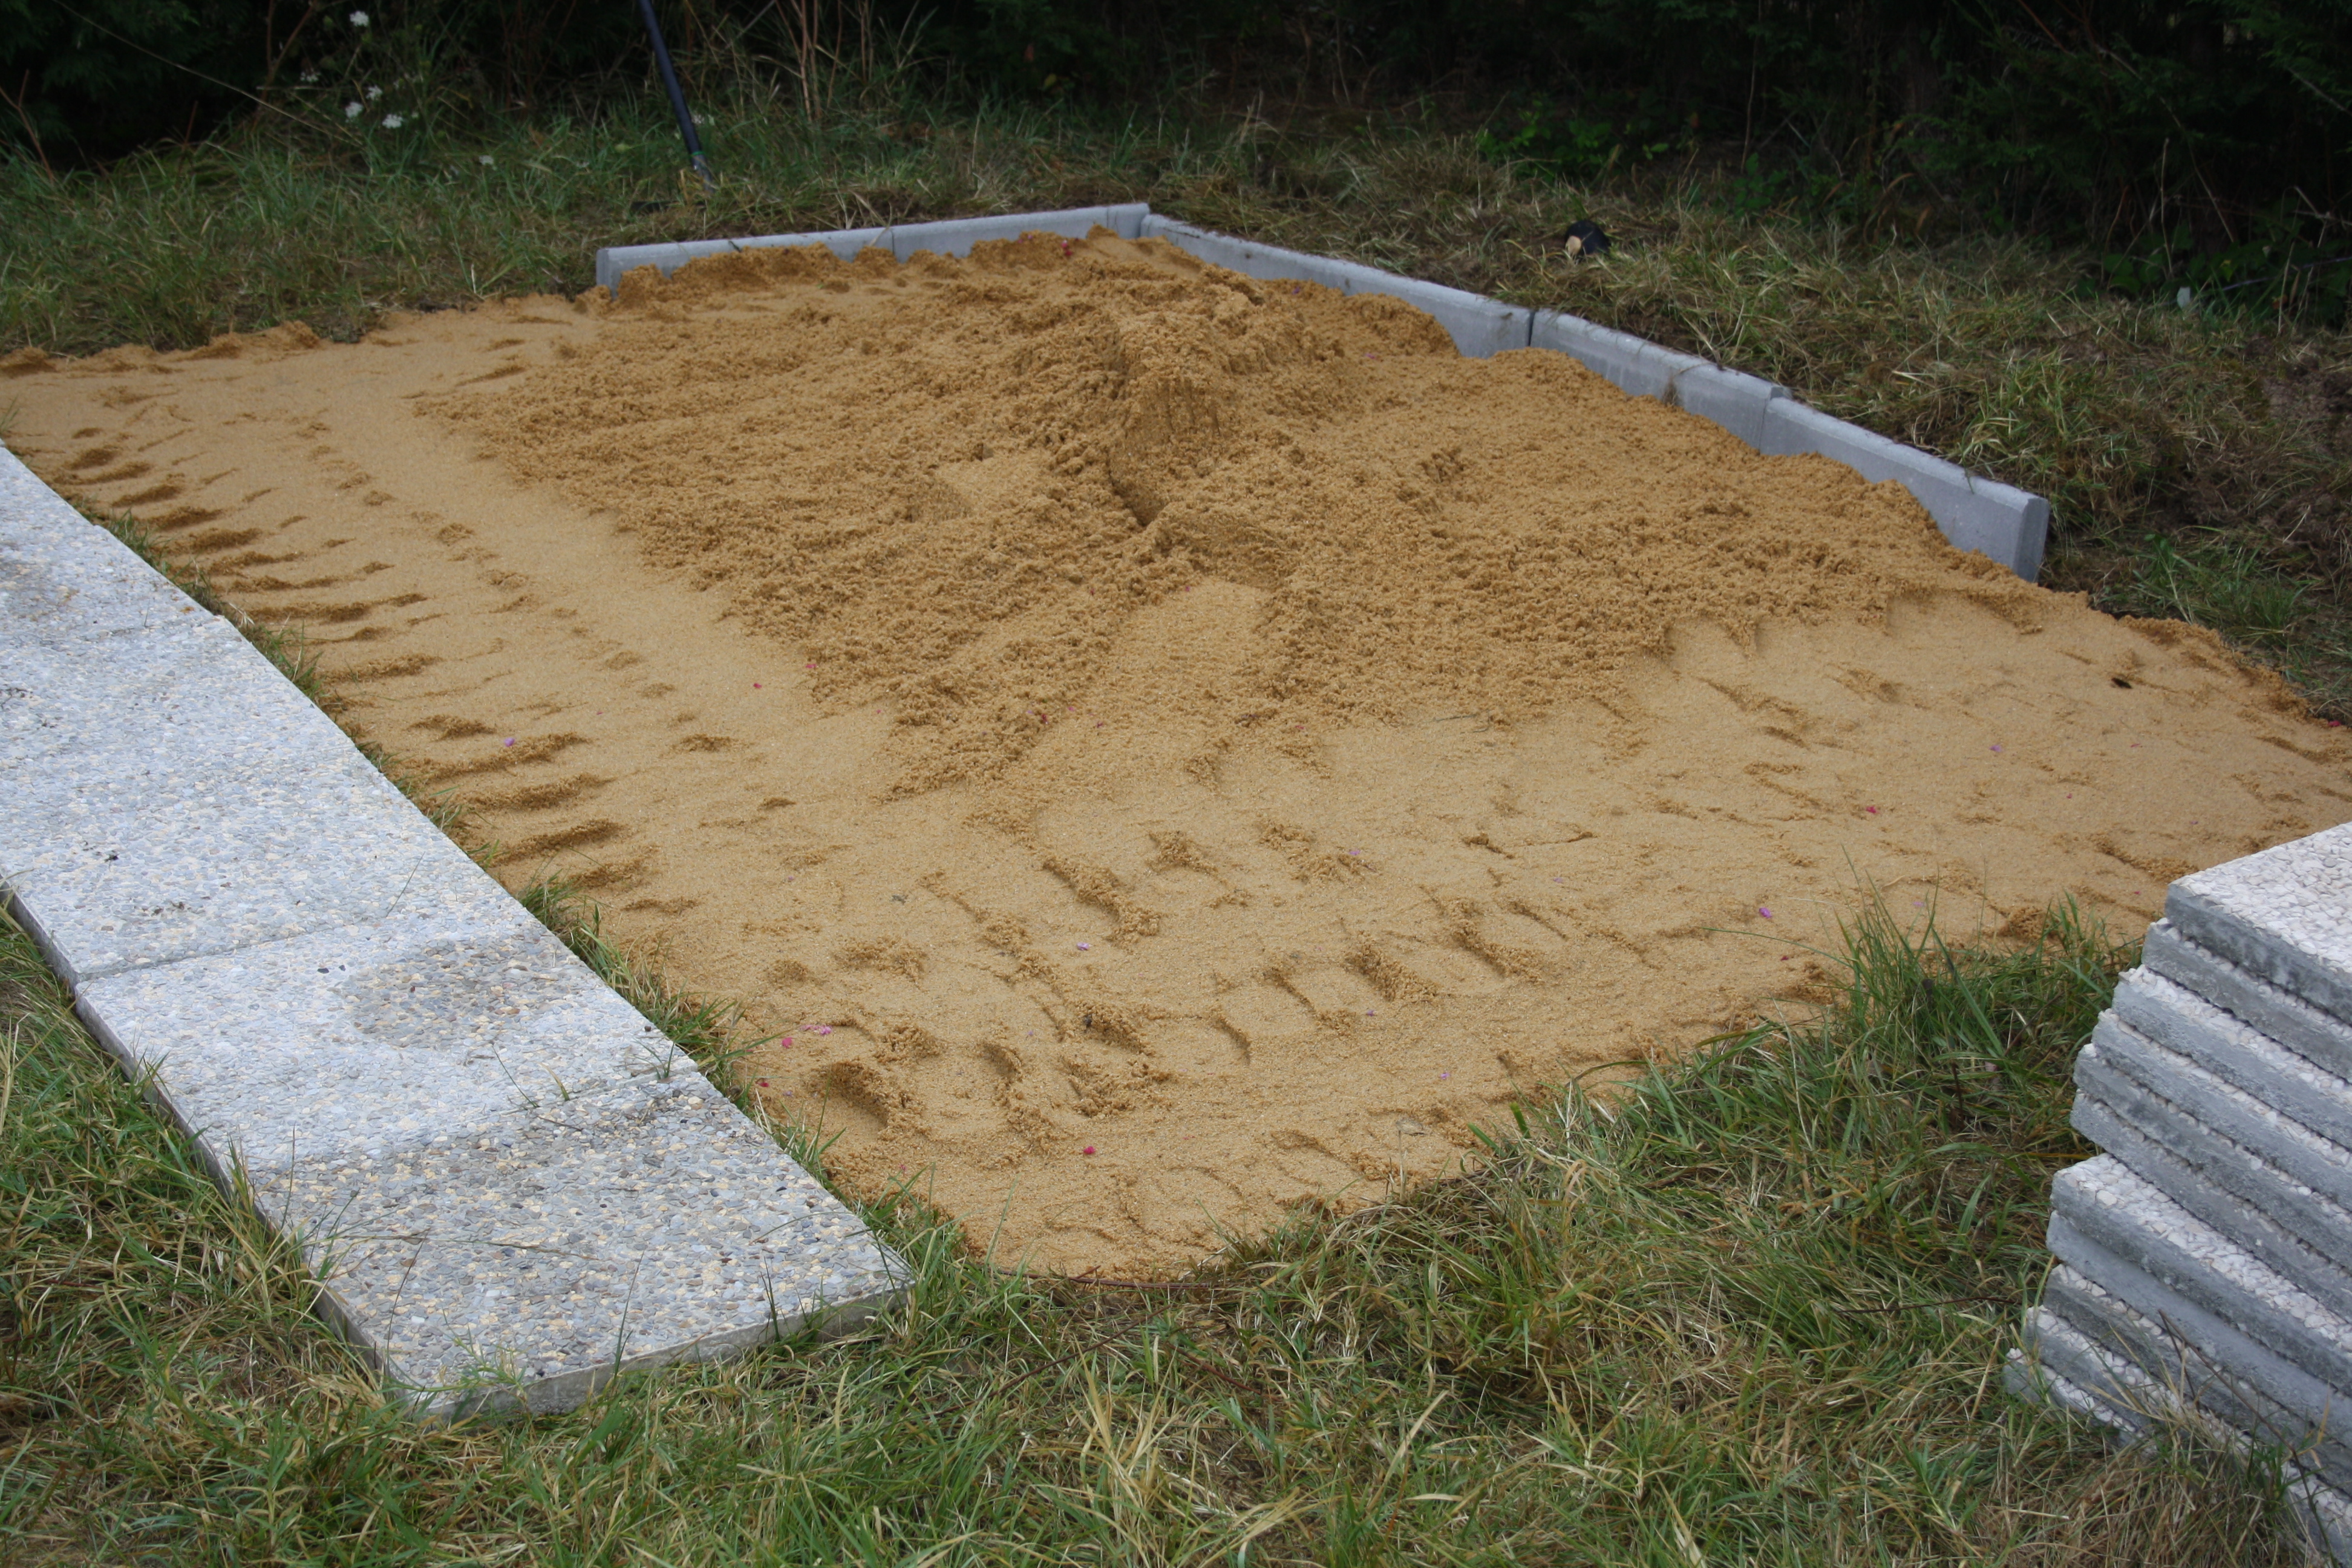 How to build a shed base and erect a shed in France (in 11 hours)